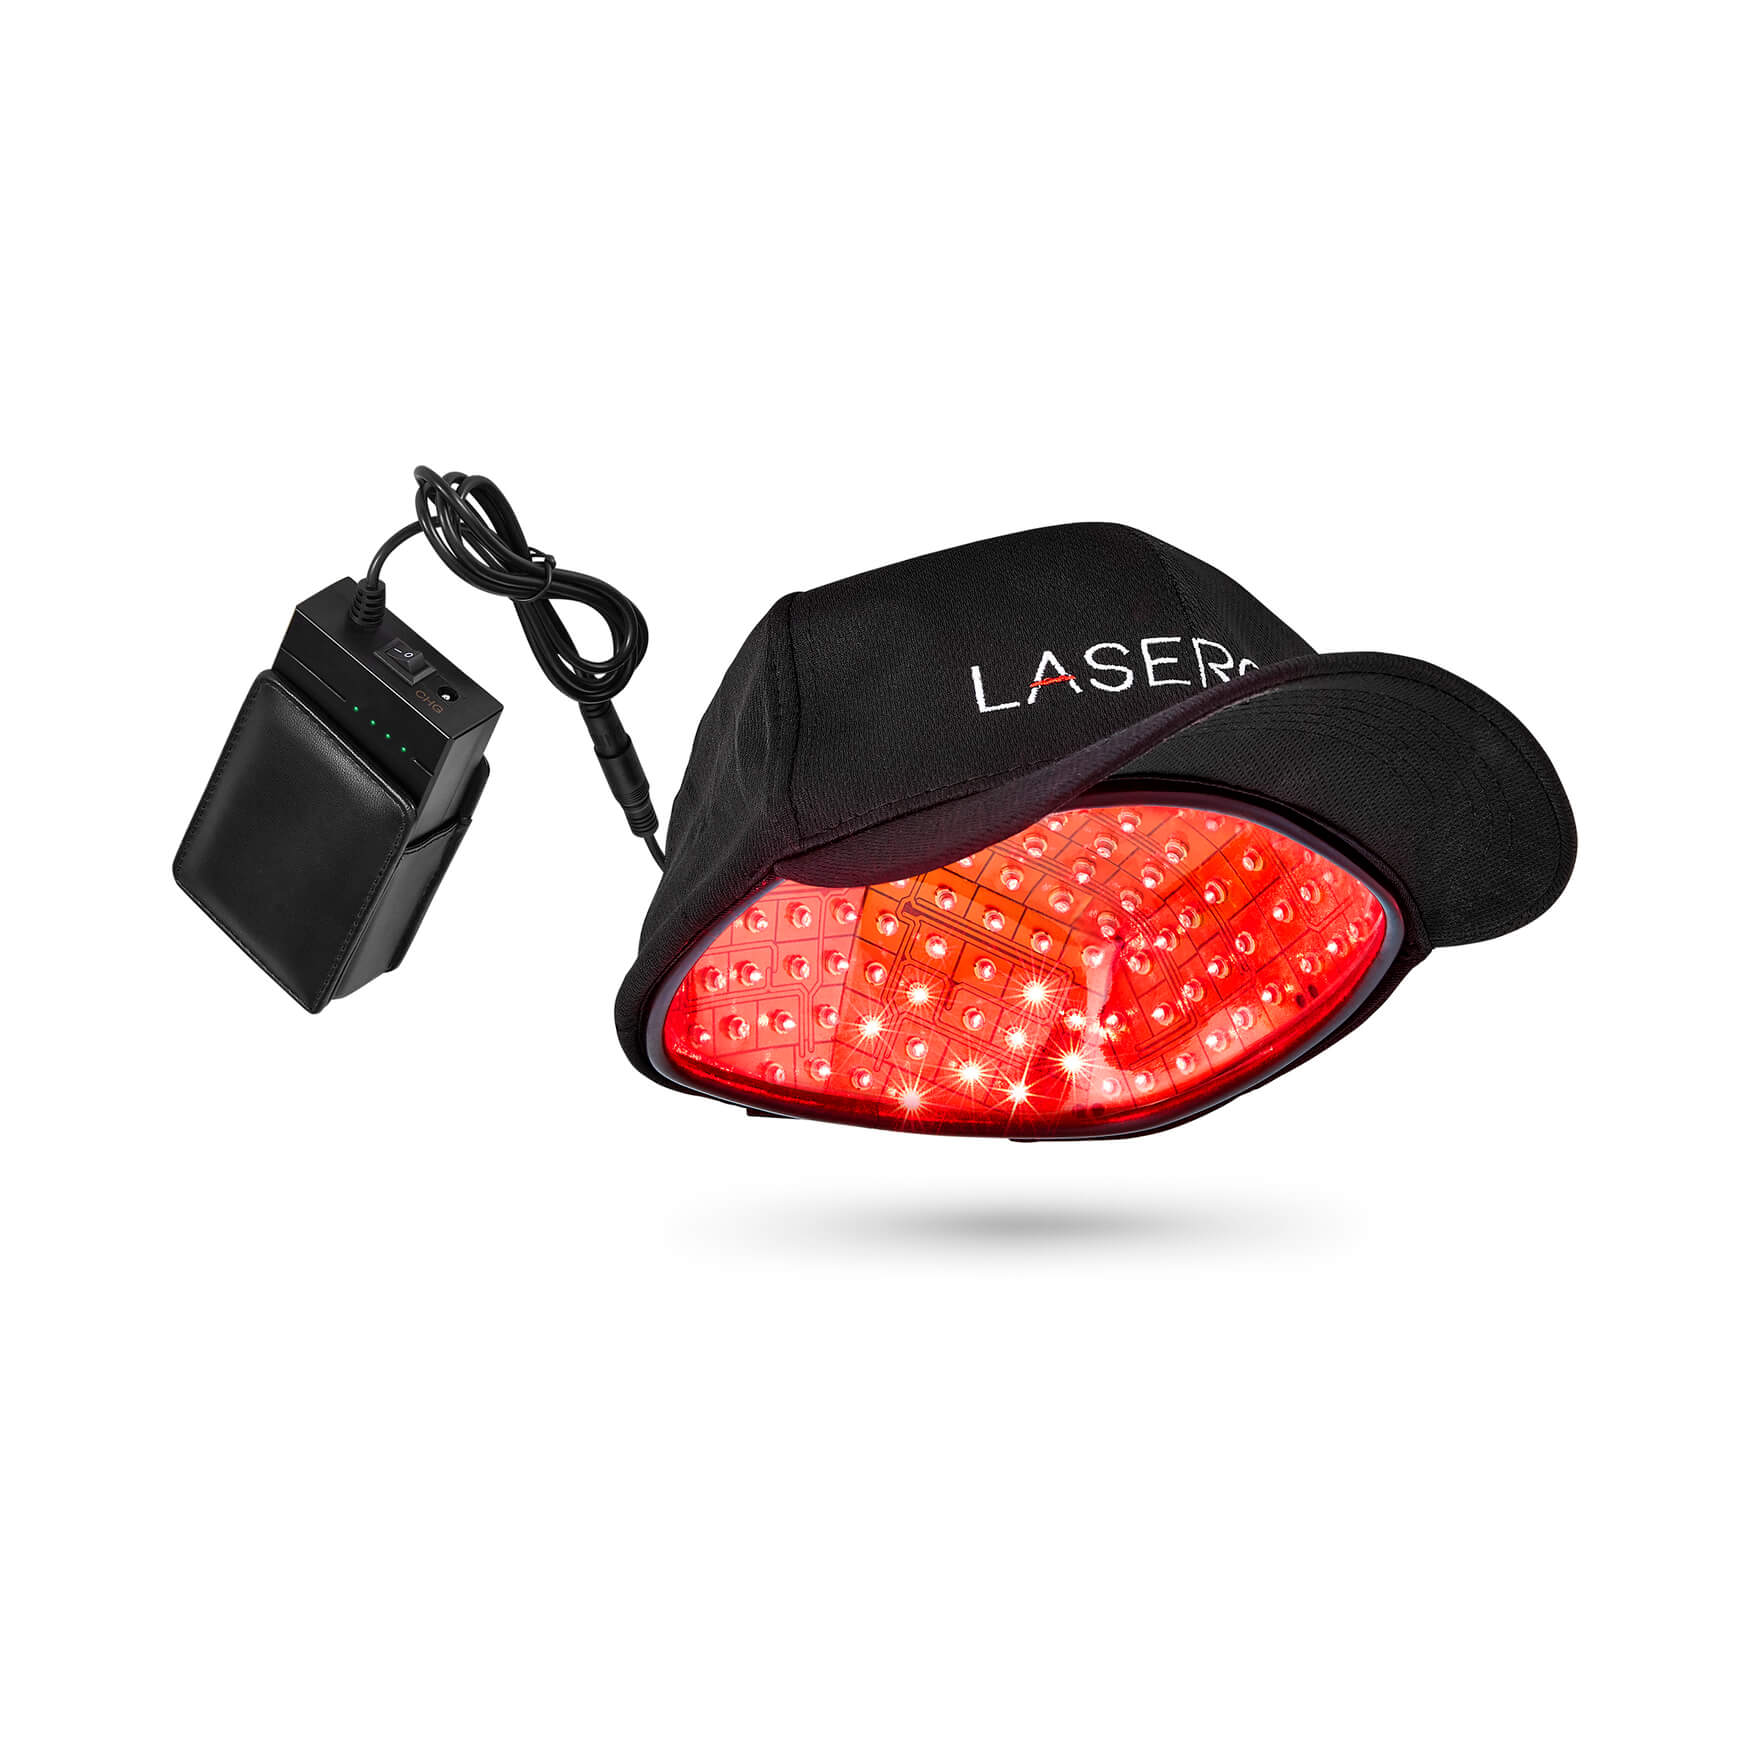 LaserCap HD+ with power pack